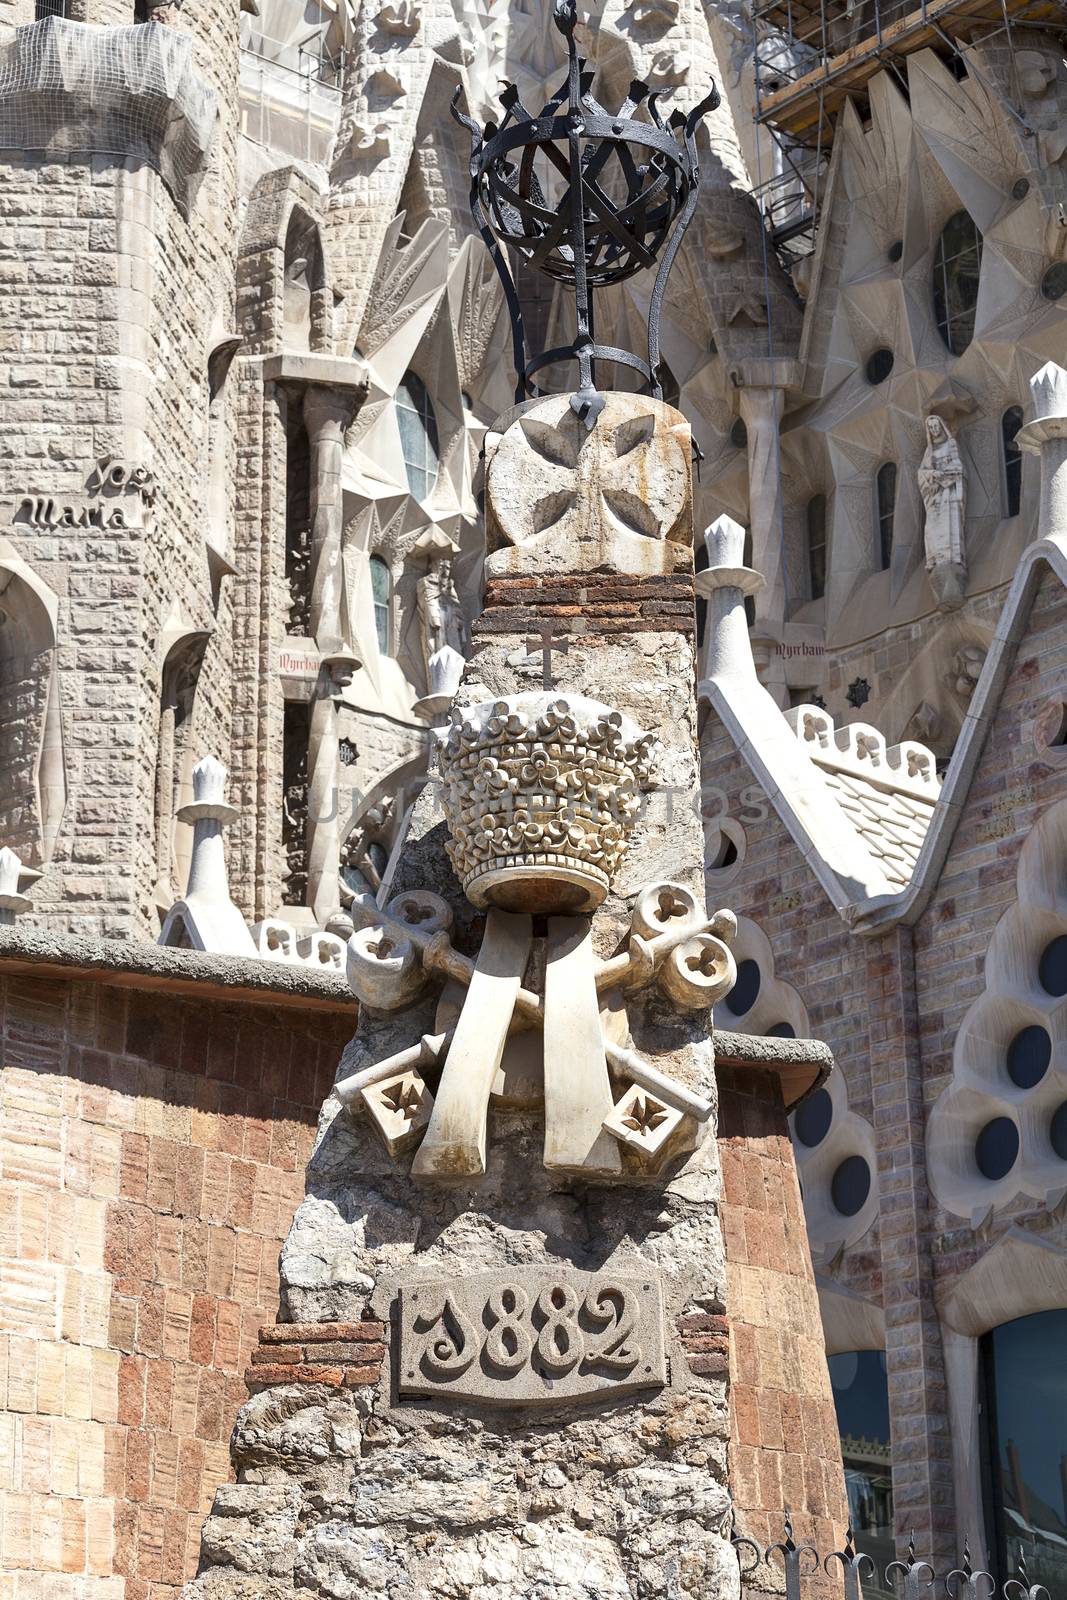 BARCELONA, SPAIN - MAY 13, 2016 : Details of Sagrada Familia, church  designed by Spanish architect Antoni Gaudi. Catholic church still built since March 1882, is a combination of Gothic style and curvilinear Art Nouveau forms.